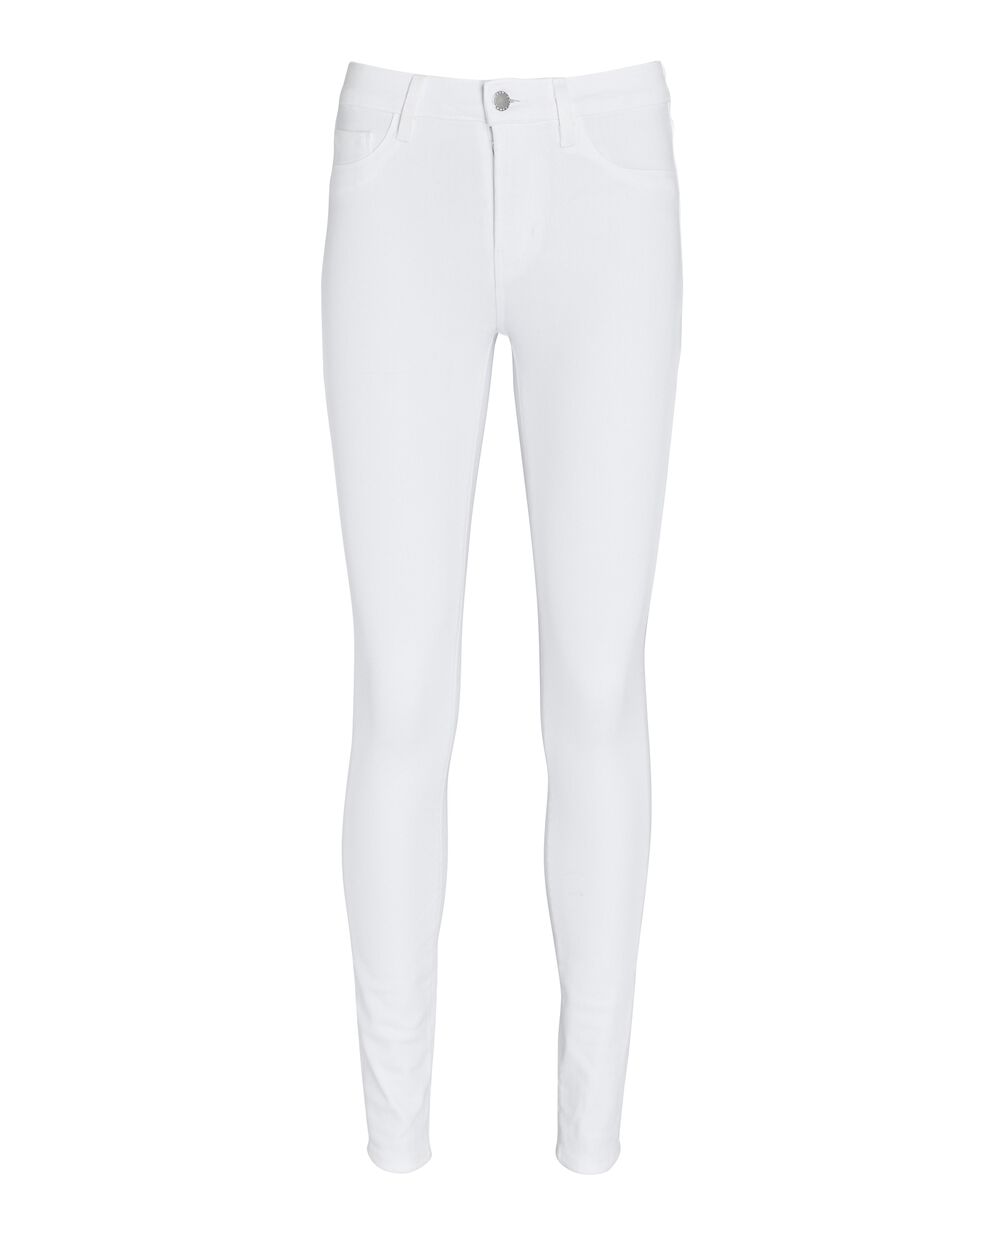 Margot Coated Skinny Jeans in | INTERMIX®